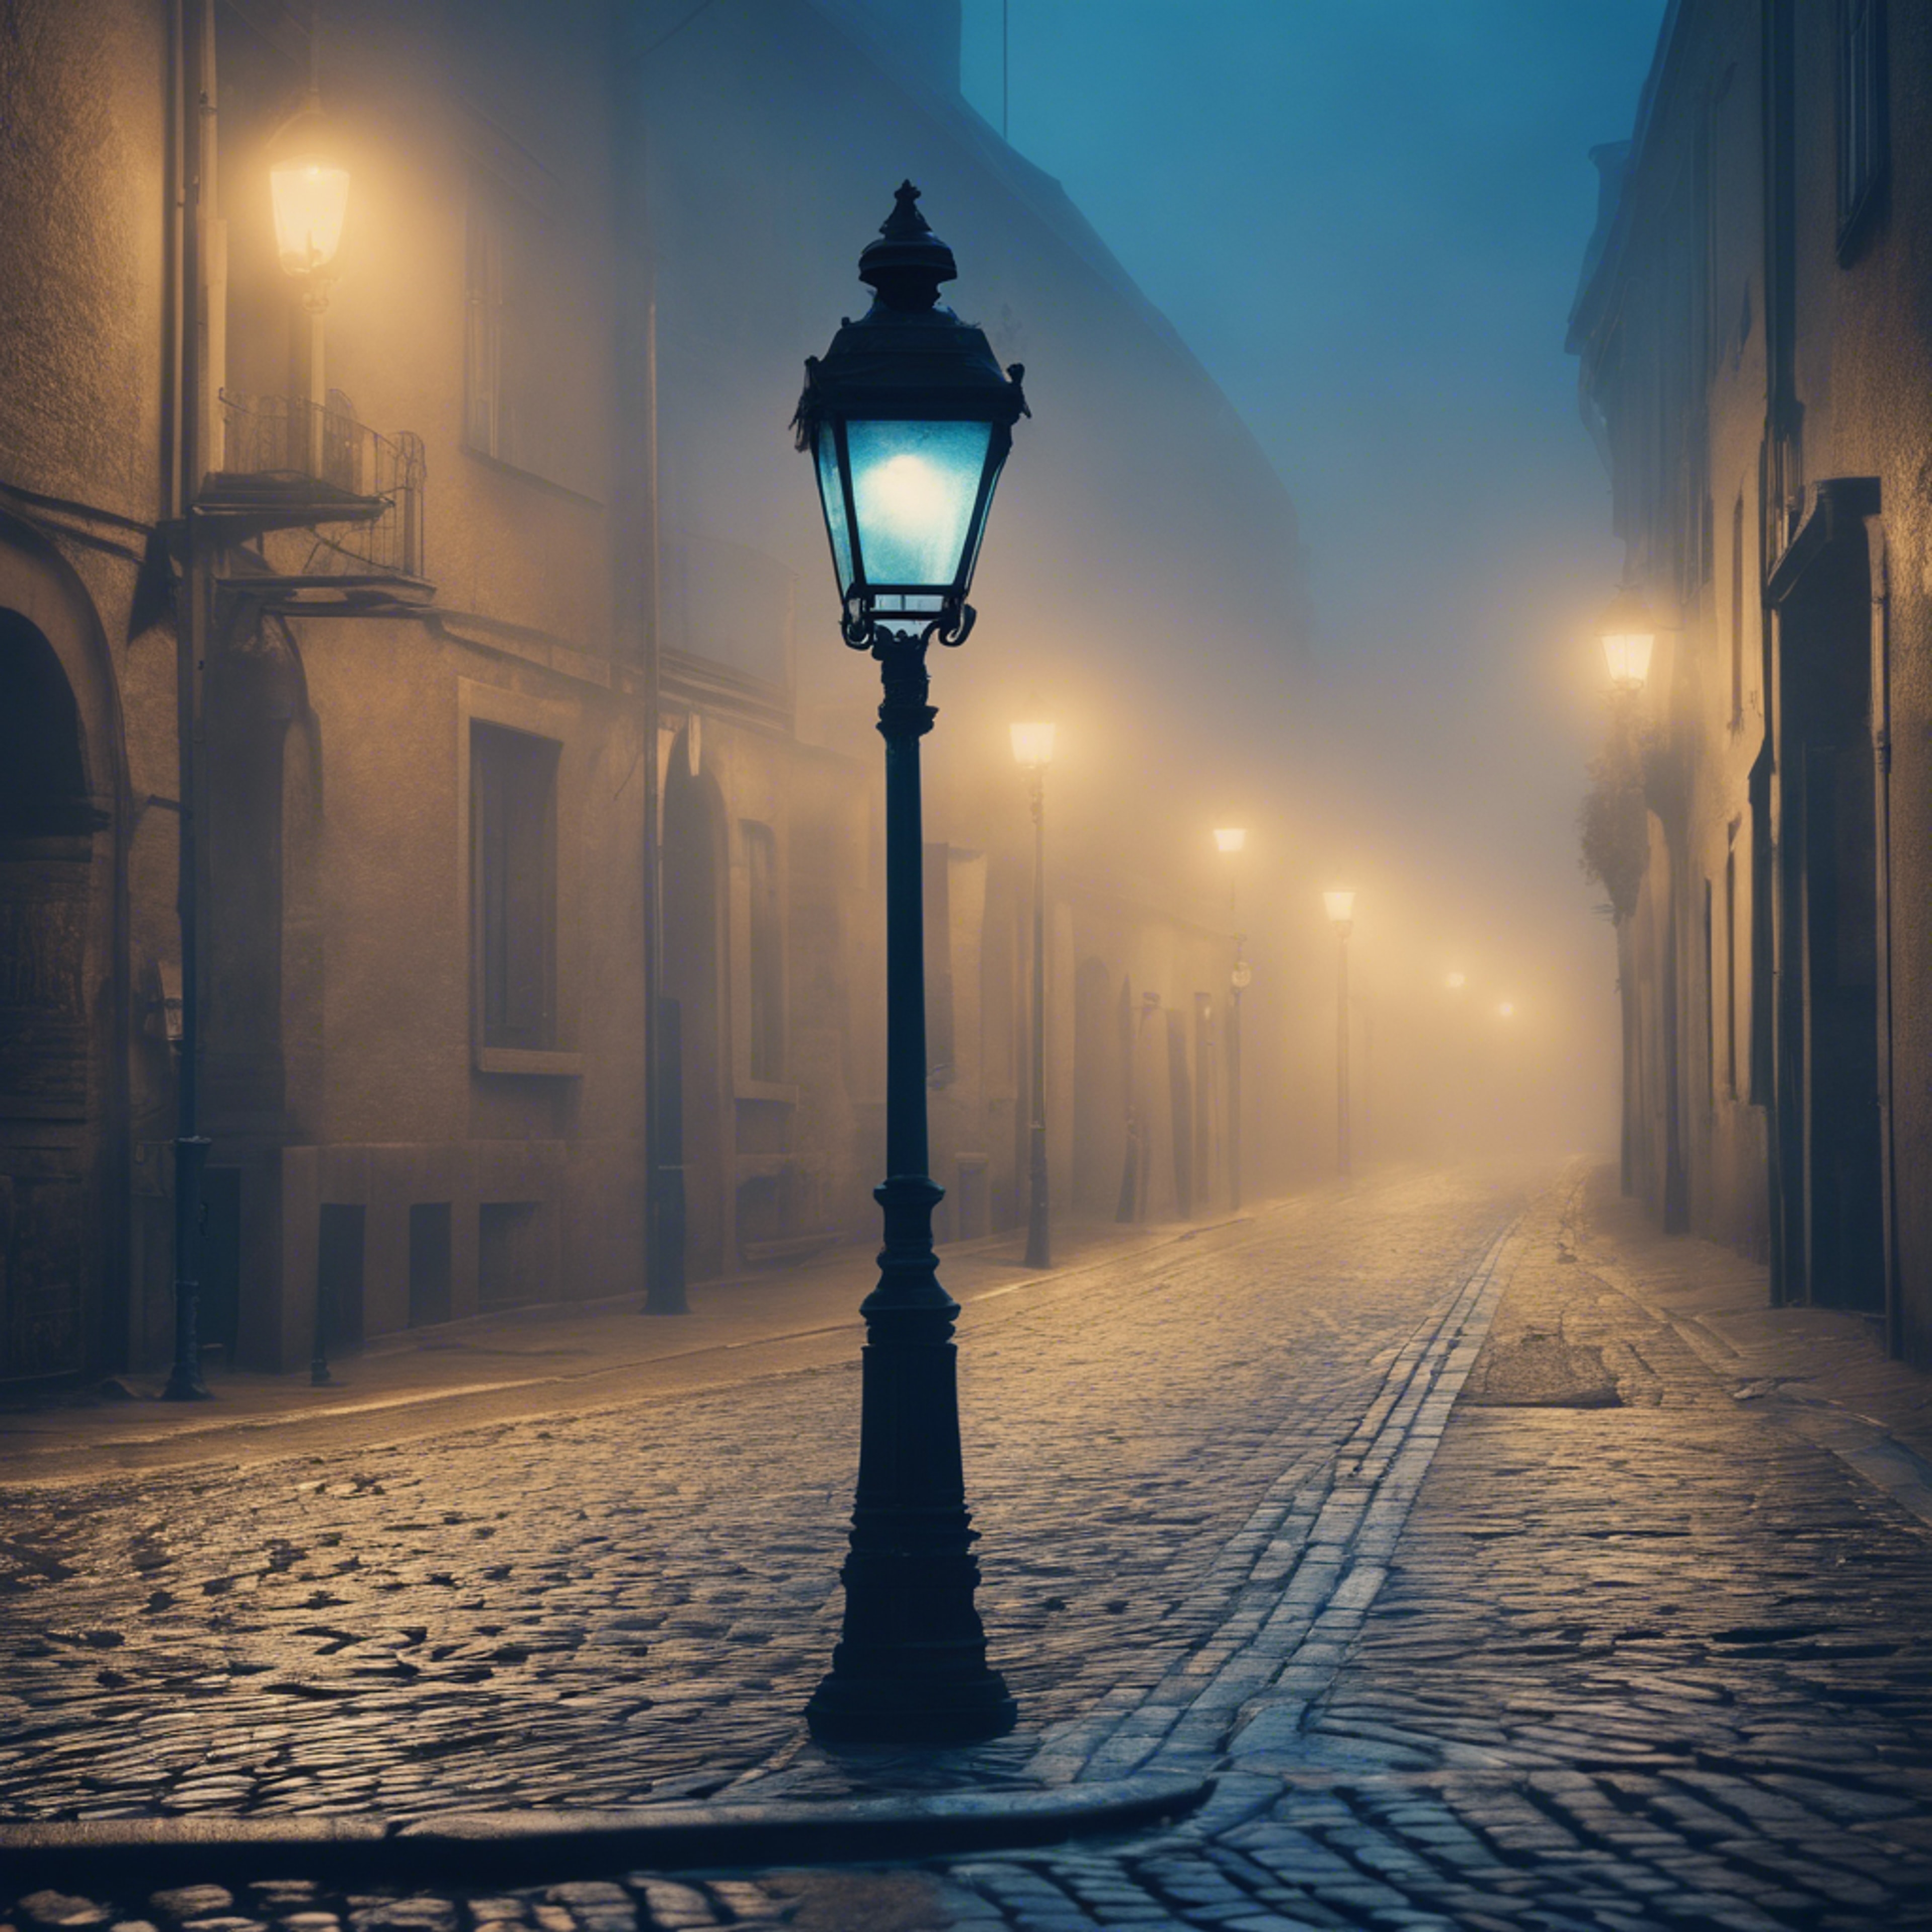 A foggy image of a cobblestone street lit by an old blue lamp post. Wallpaper[86a8420f9b4d45a484bd]